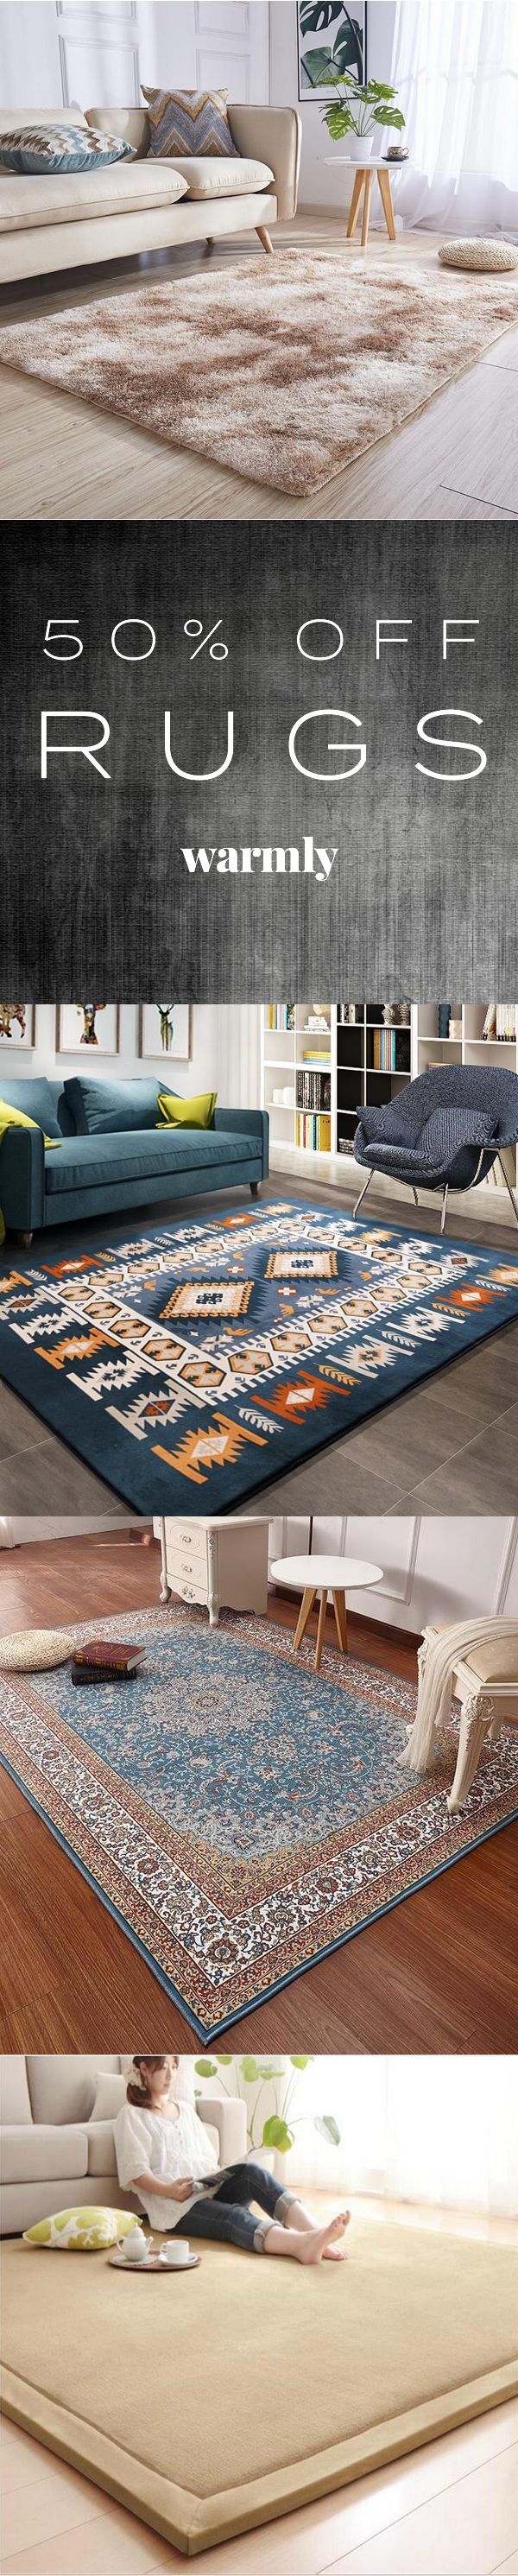 50% Off Luxurious Rugs from Warmly -   17 urban style house
 ideas